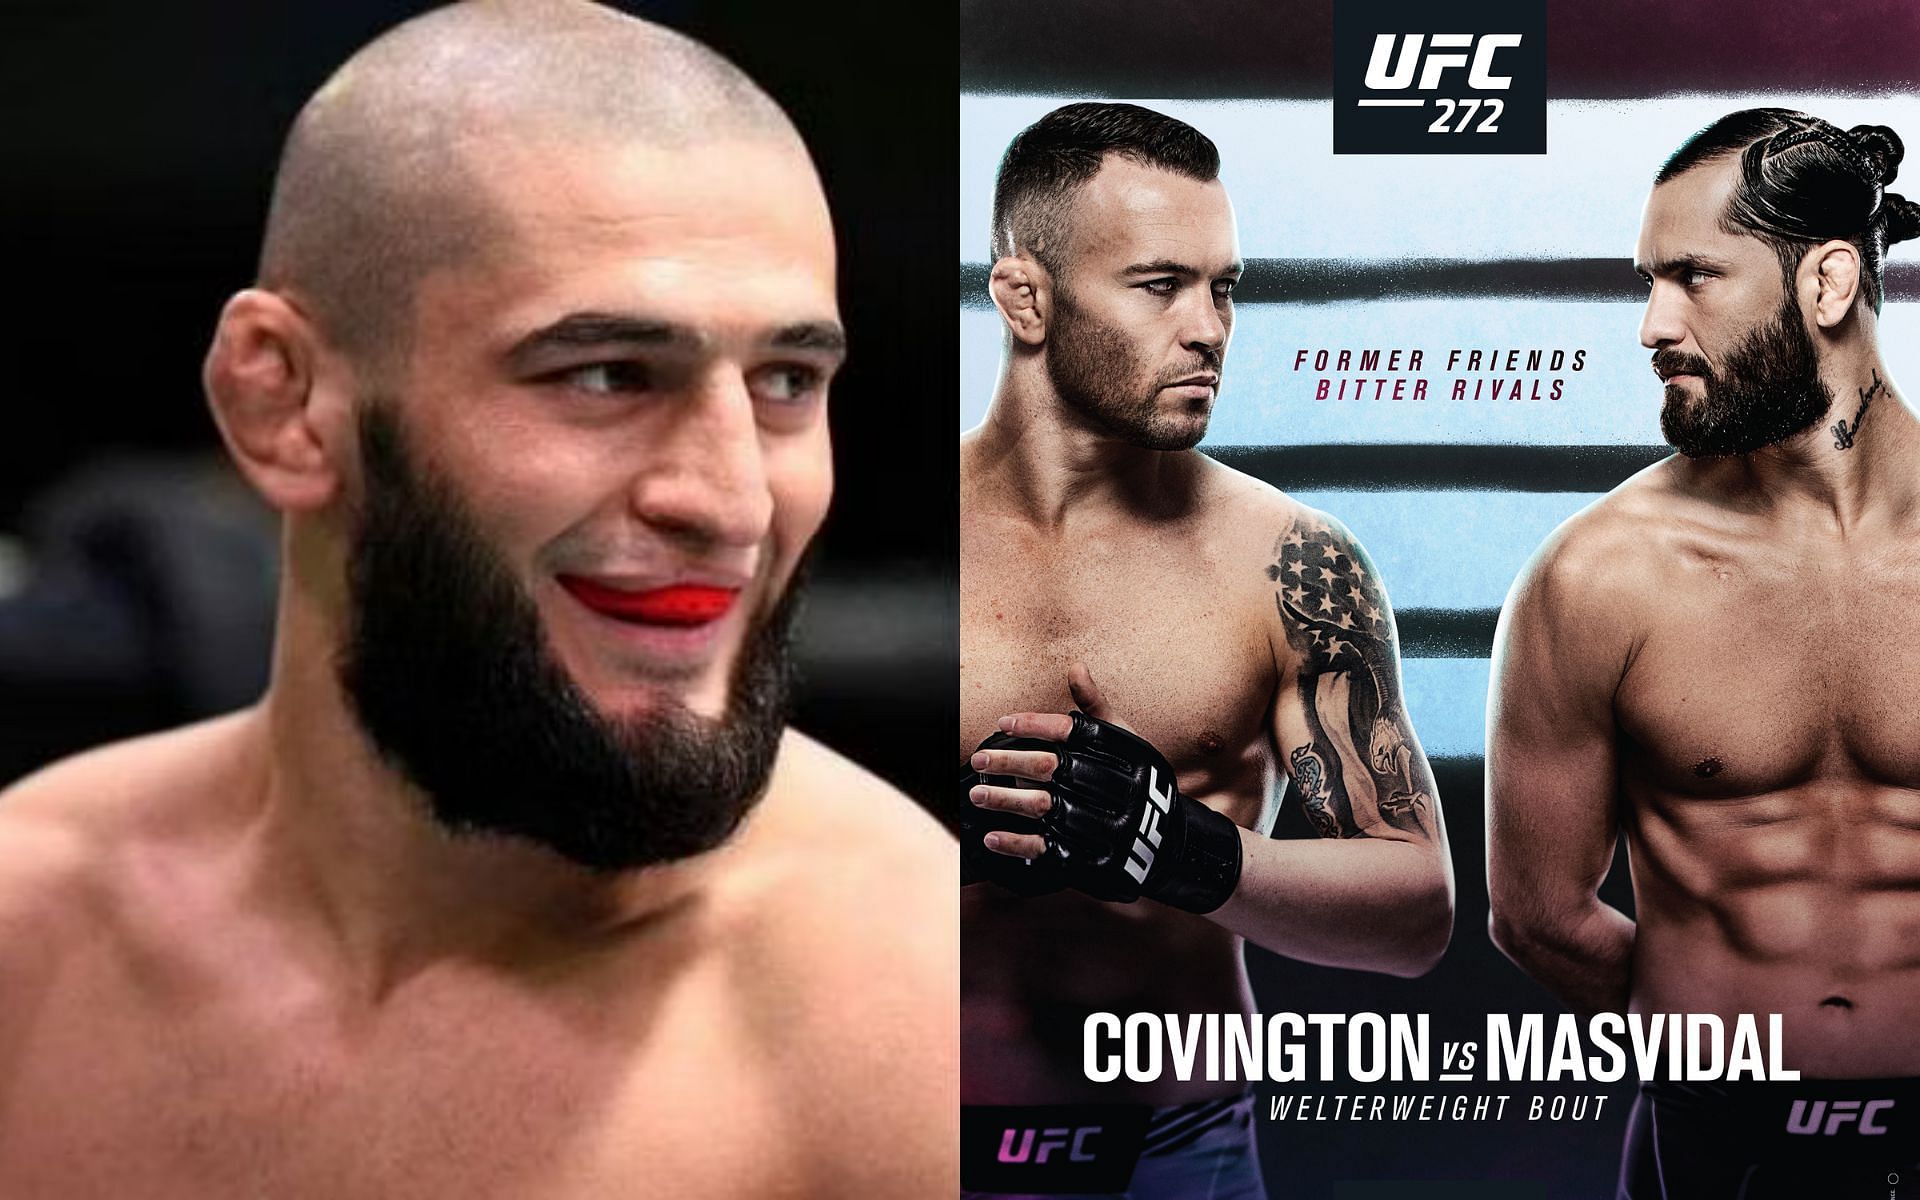 Khamzat Chimaev weighs in on upcoming grudge match between Colby Covington and Jorge Masvidal [Image courtesy - @ufc on Twitter]